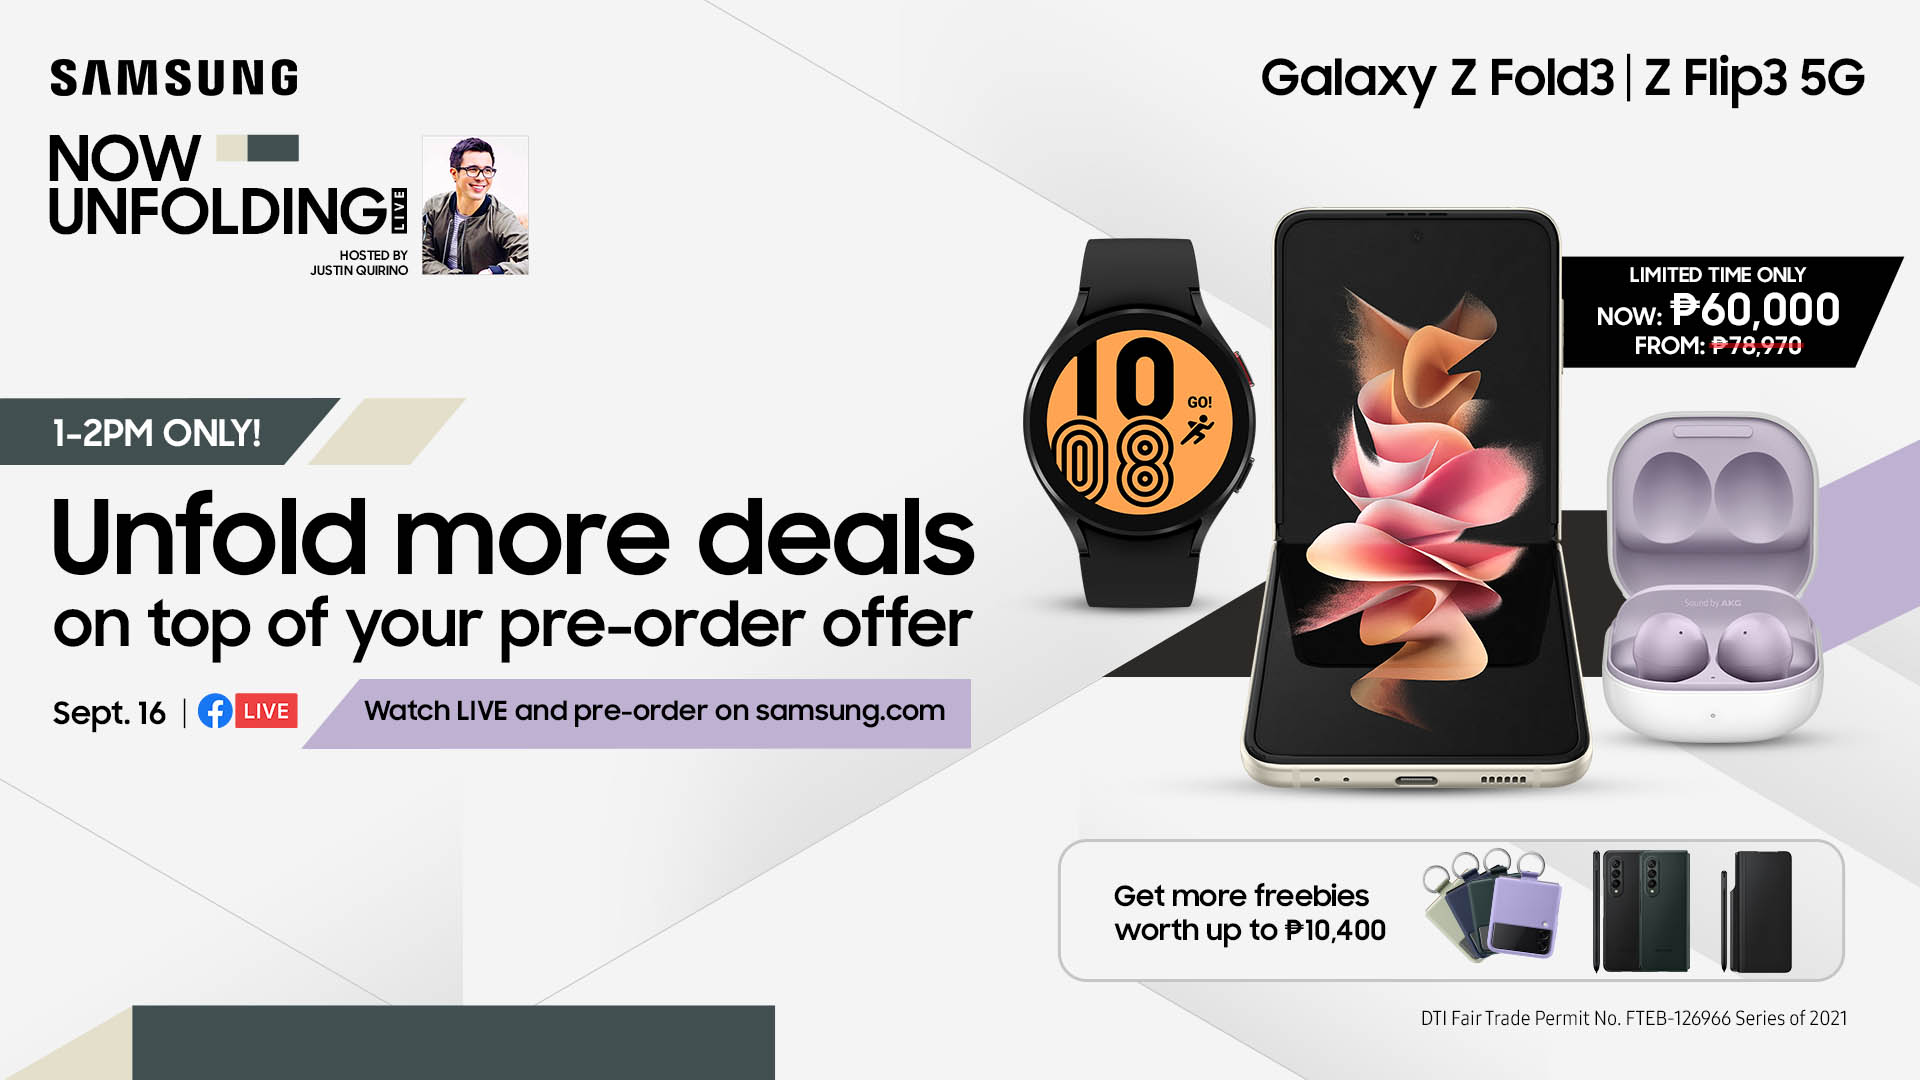 WATCH: #TeamGalaxy to unfold exclusive deals on top of the Galaxy Z Fold3 5G and Galaxy Z Flip3 5G pre-order offer!